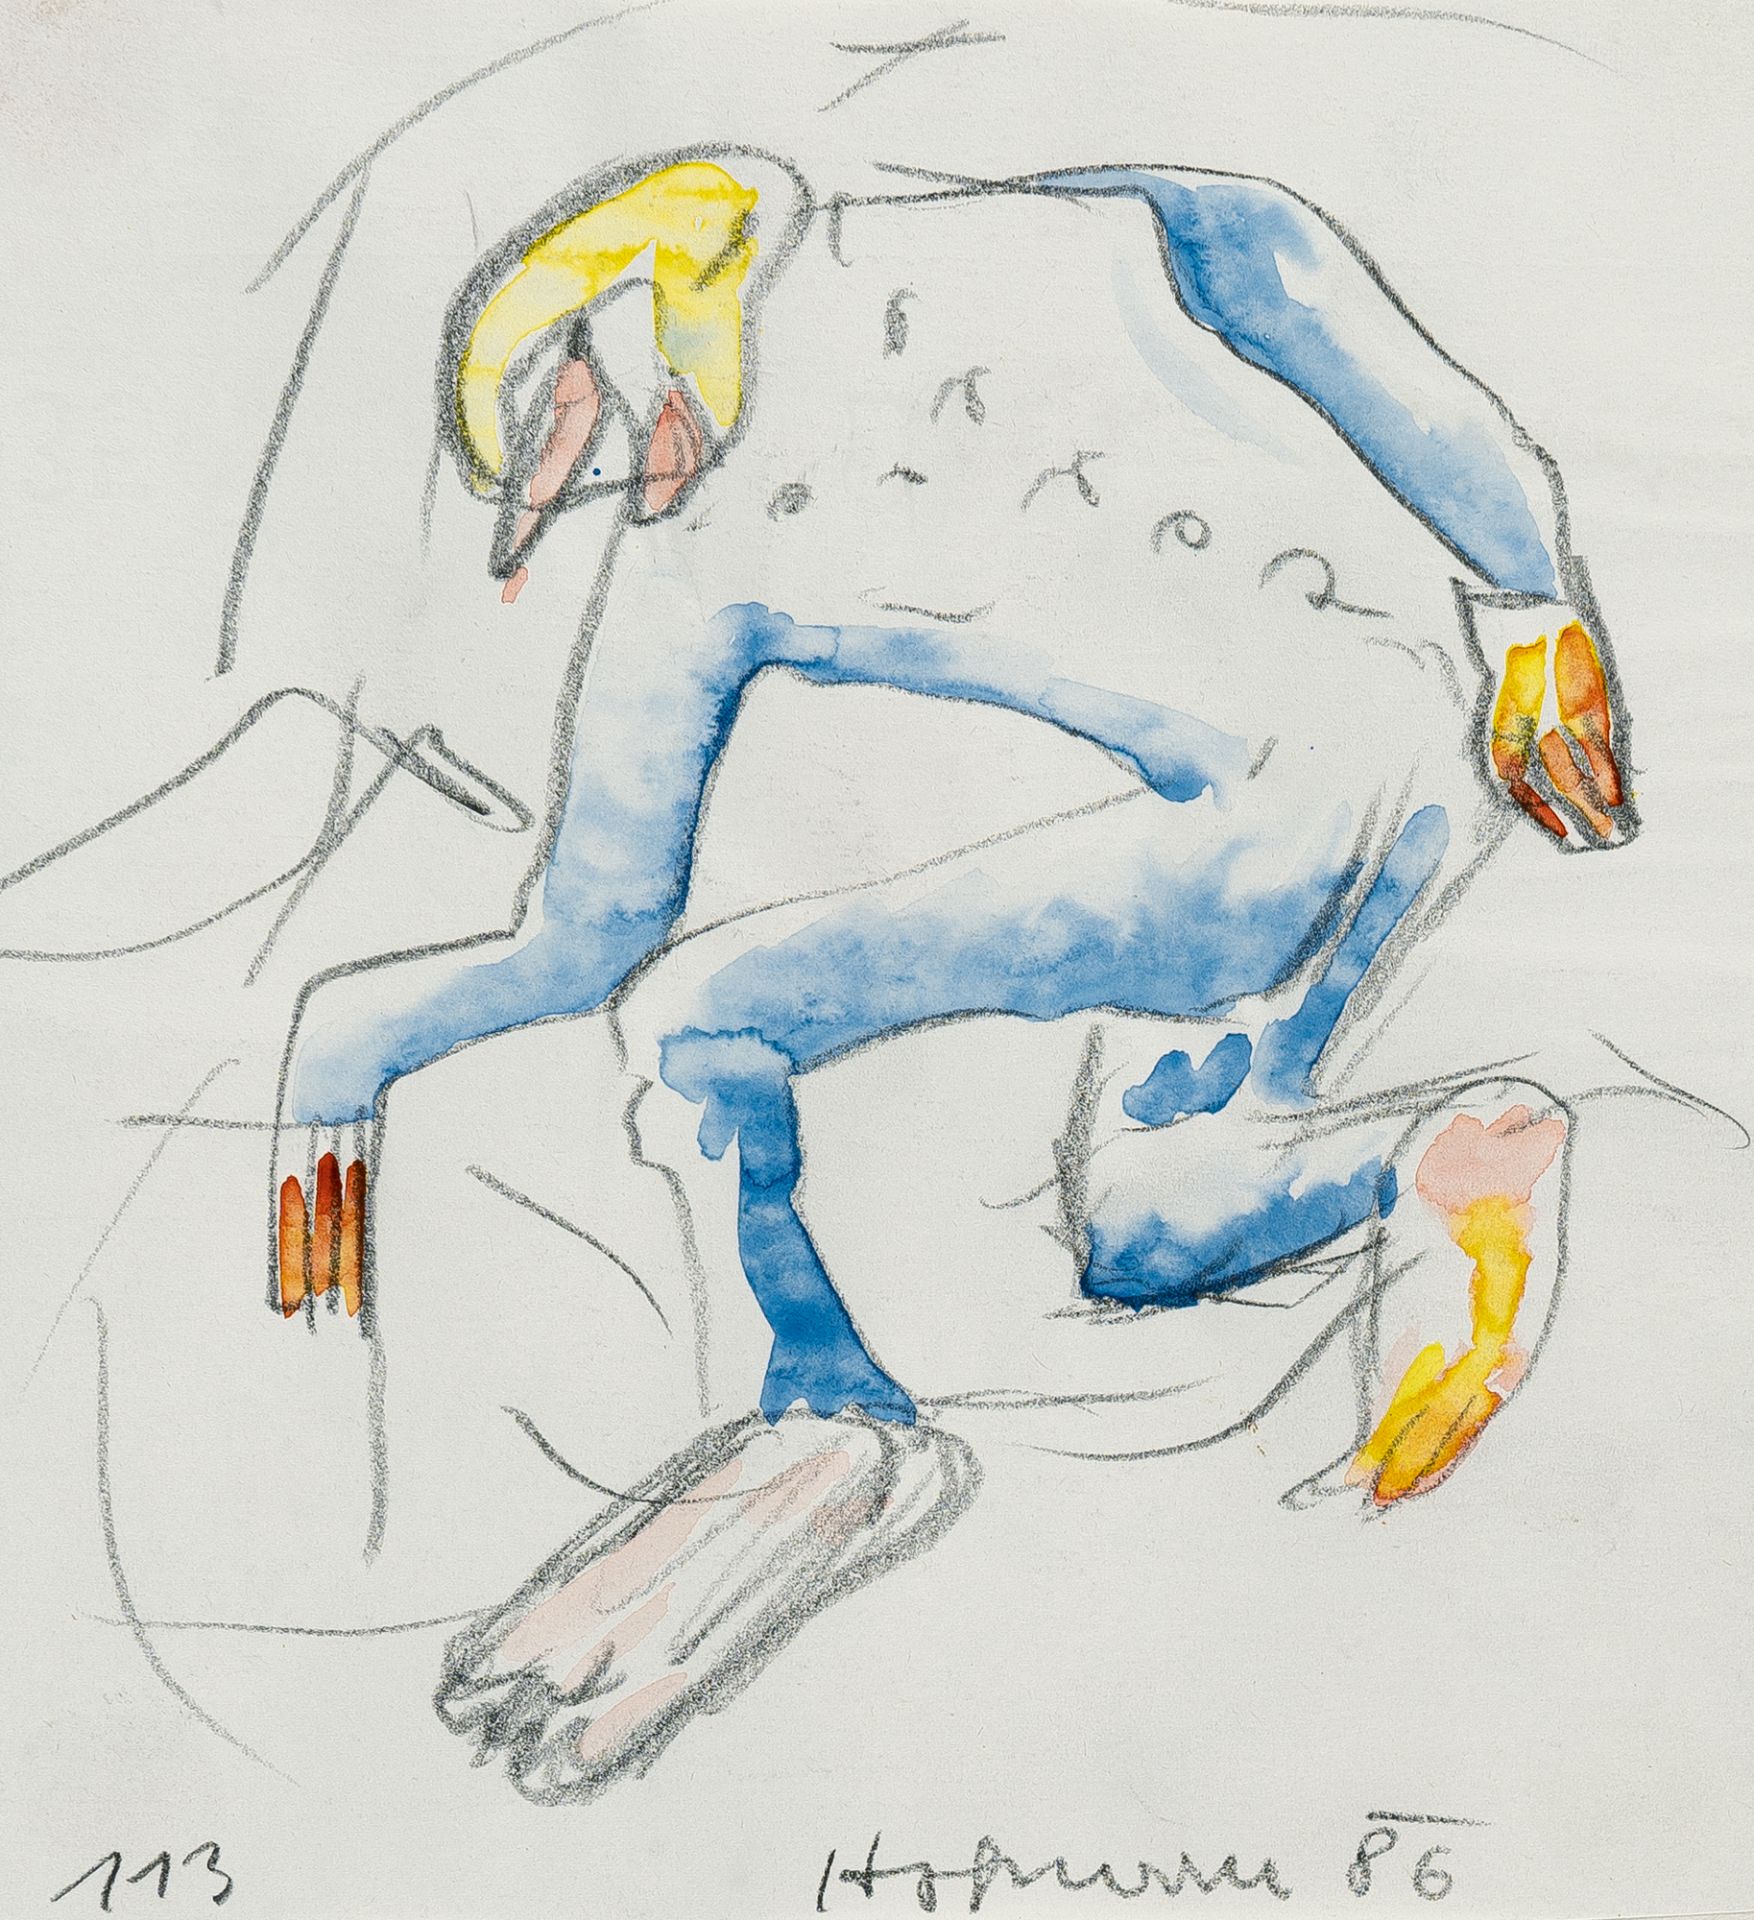 Kurt Hüpfner (1930 – Wien – 2022), 2 sheets: UntitledWatercolour (1) and pencil on paper, mounted on